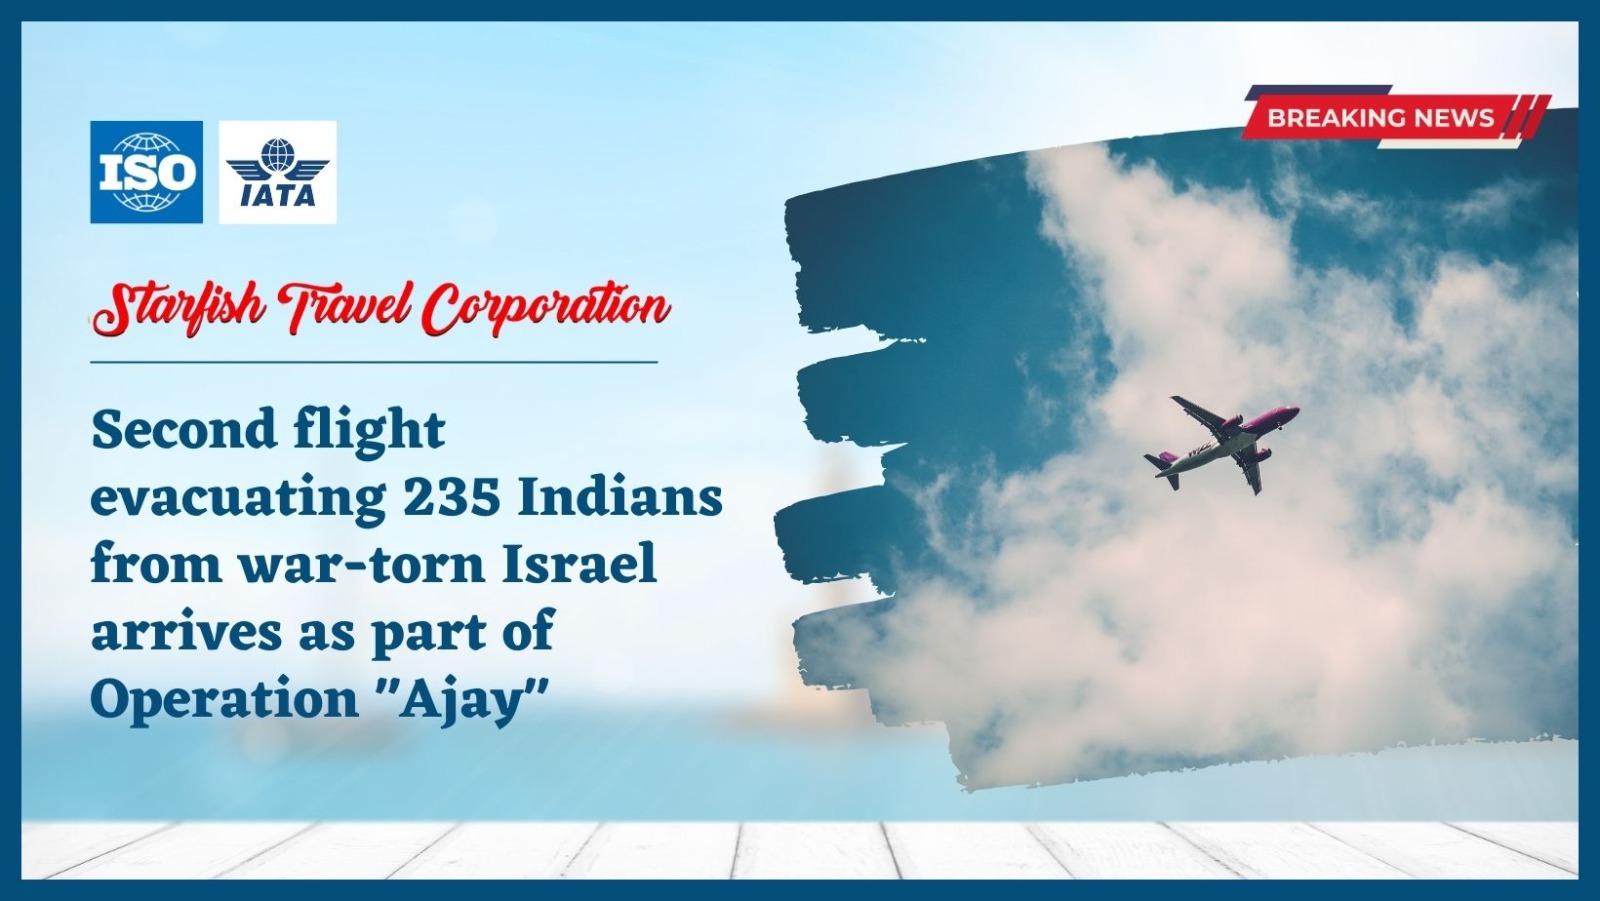 Second flight evacuating 235 Indians from war-torn Israel arrives as part of Operation “Ajay”